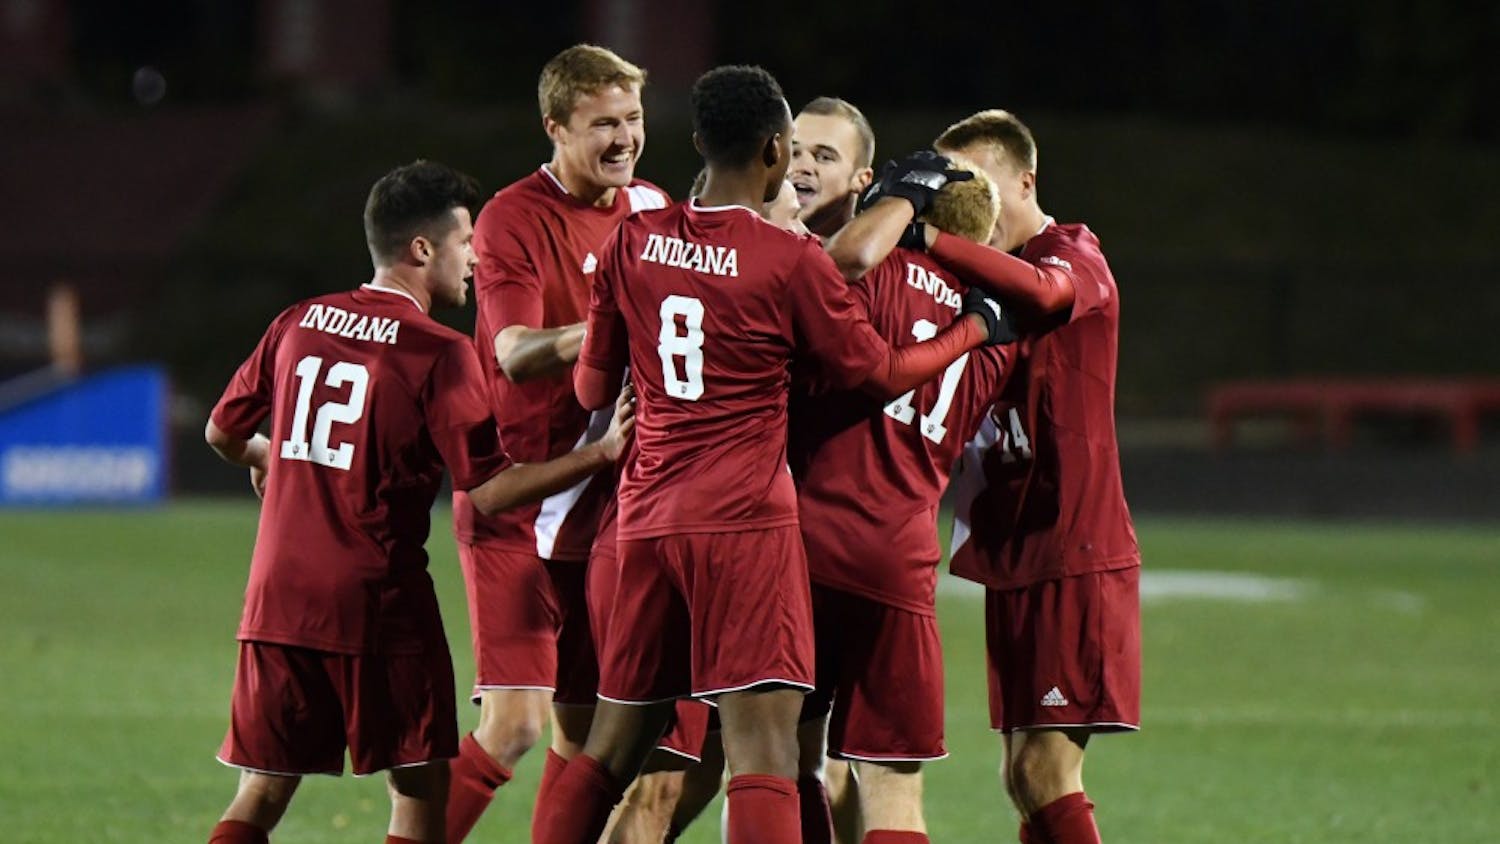 IU celebrates after junior midfielder Cory Thomas scores a goal in the first half against New Hampshire in the third round of the NCAA tournament at Bill Armstrong Stadium. IU defeated New Hampshire, 2-1, to advance to the quarterfinals of the NCAA tournament against Michigan State.